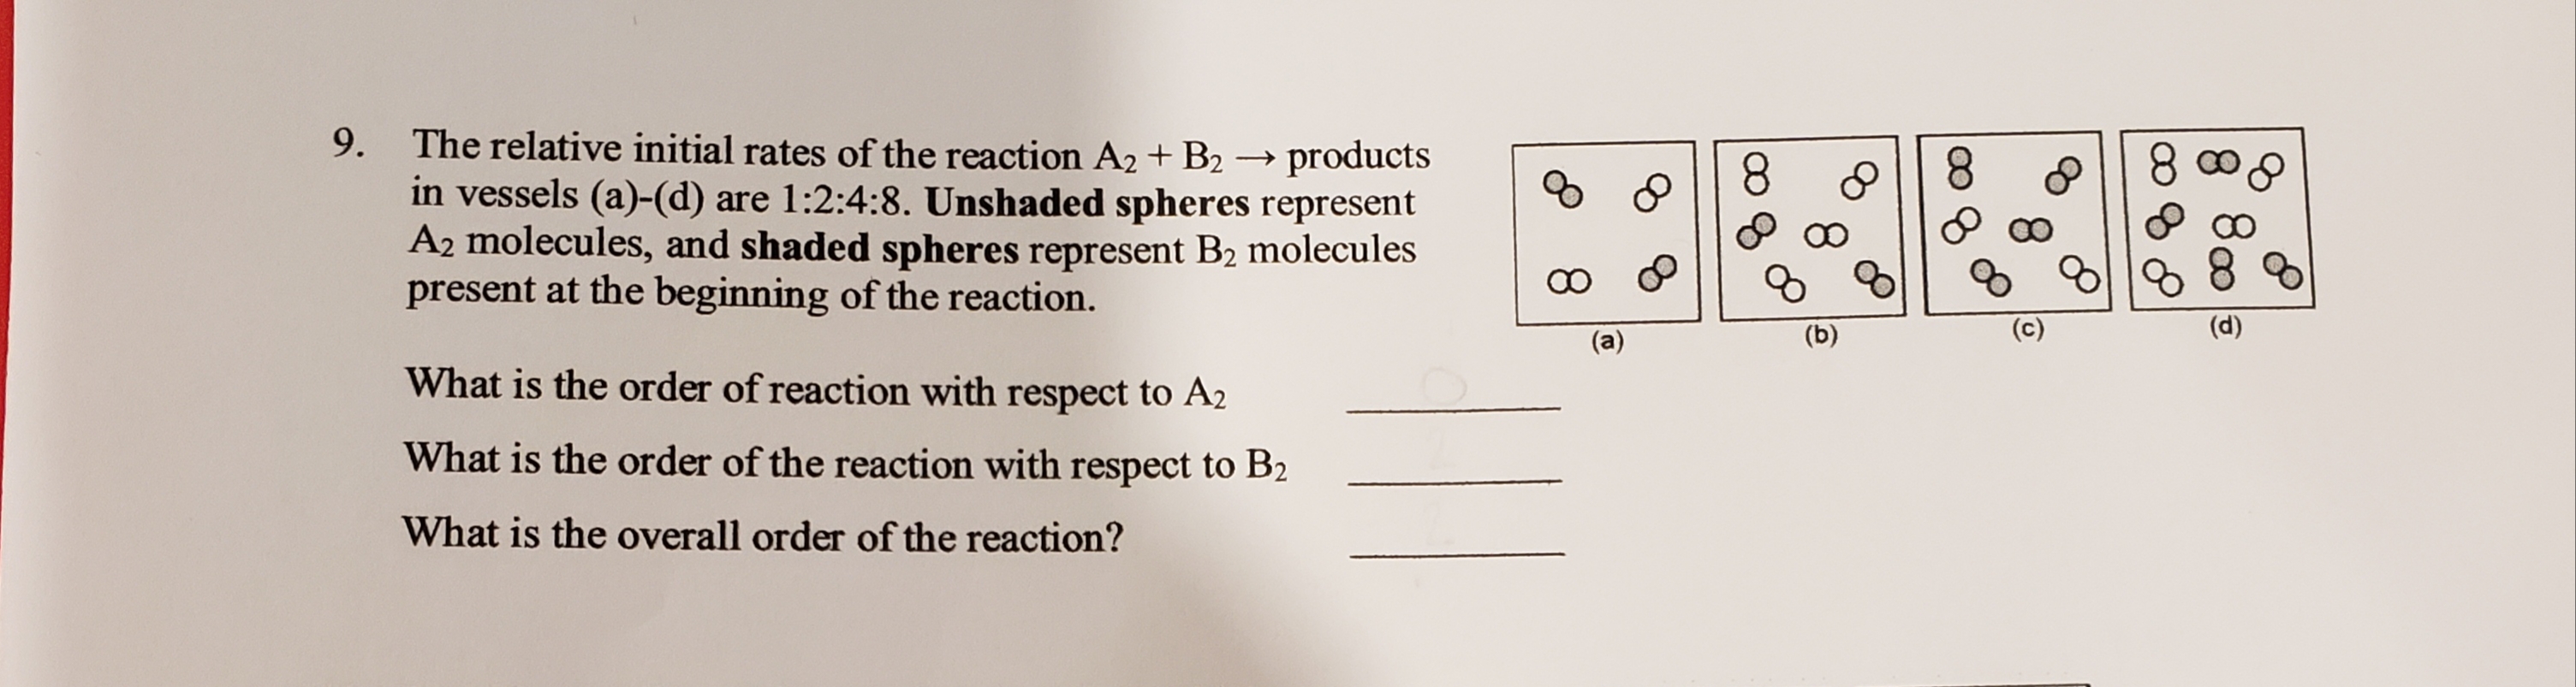 The relative initial rates of the reaction A2 + B2 → products
in vessels (a)-(d) are 1:2:4:8. Unshaded spheres represent
A2 molecules, and shaded spheres represent B2 molecules
present at the beginning of the reaction.
9.
8.
8.
of
(b)
(c)
(d)
What is the order of reaction with respect to A2
What is the order of the reaction with respect to B2
What is the overall order of the reaction?
